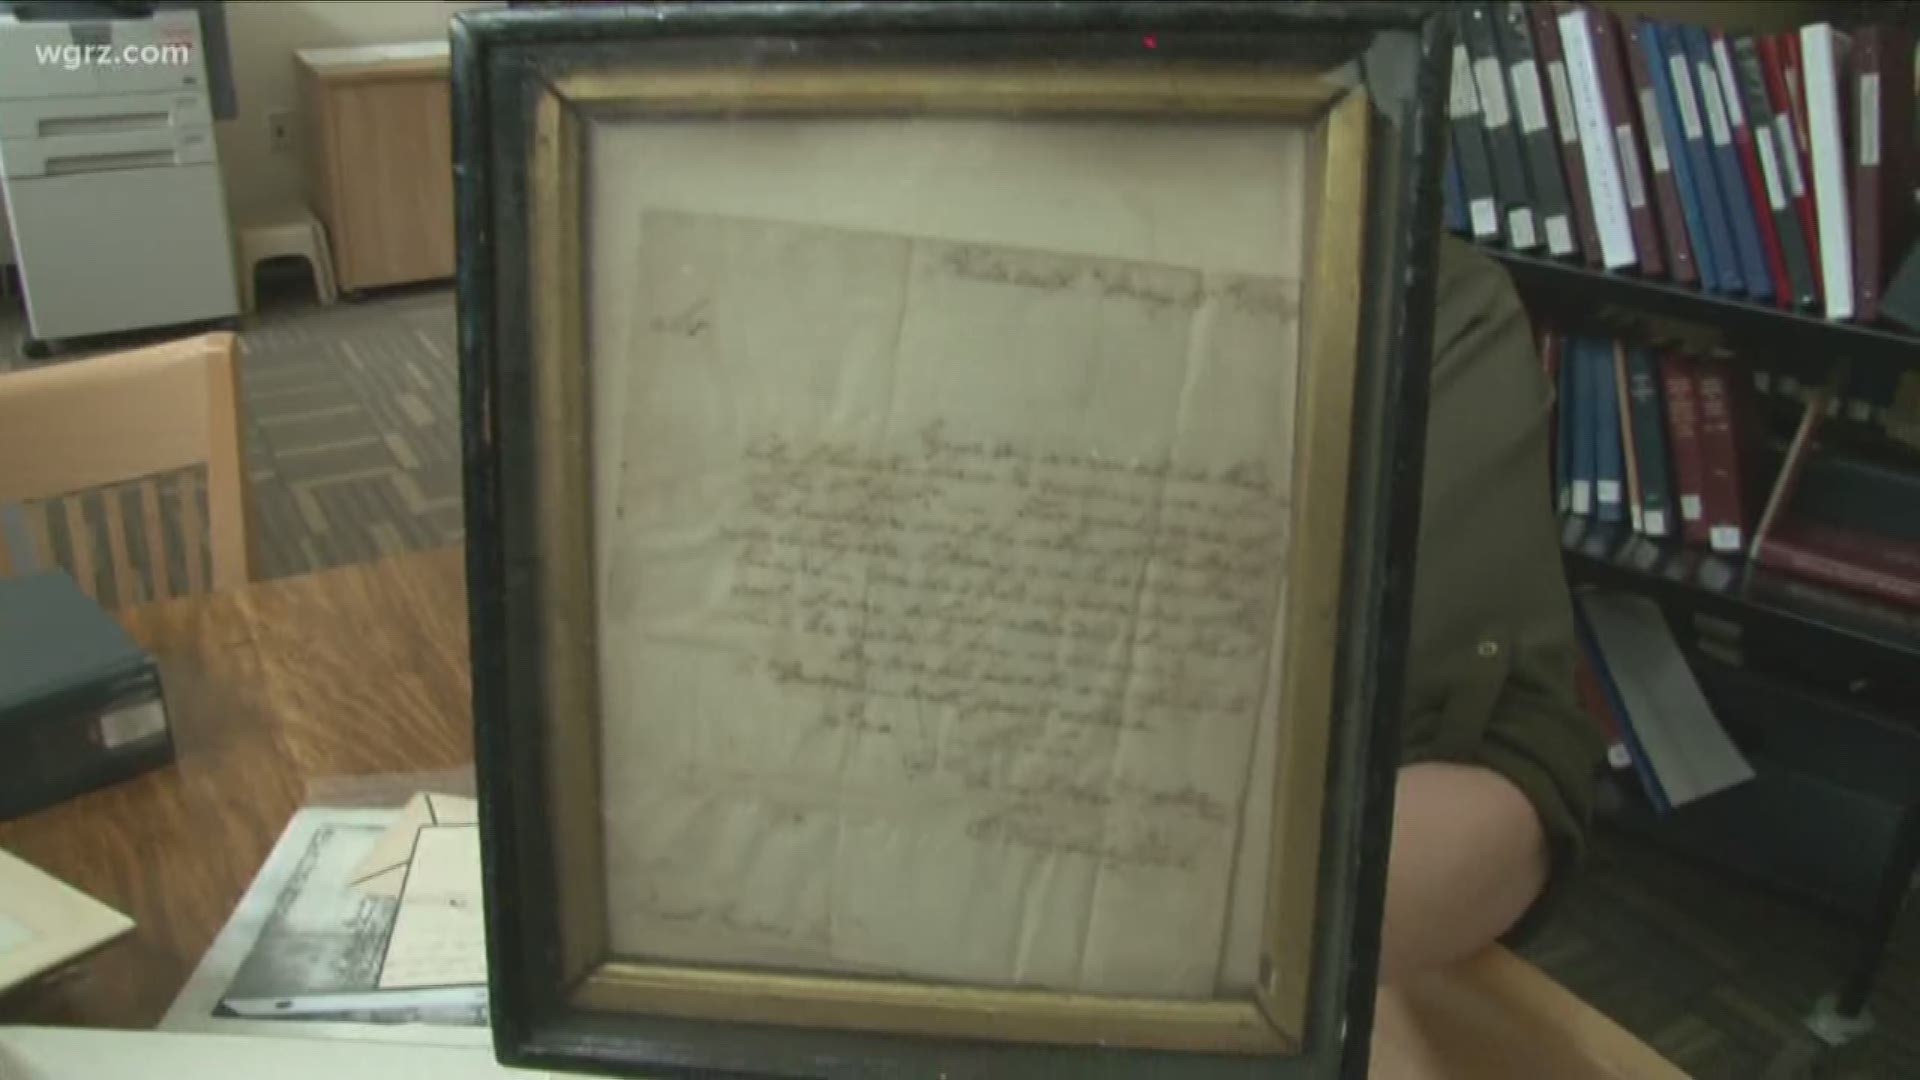 In one Orleans County library, a legendary letter sits in a most unexpected place. It's a message from the father of our country, penned 235 years ago.